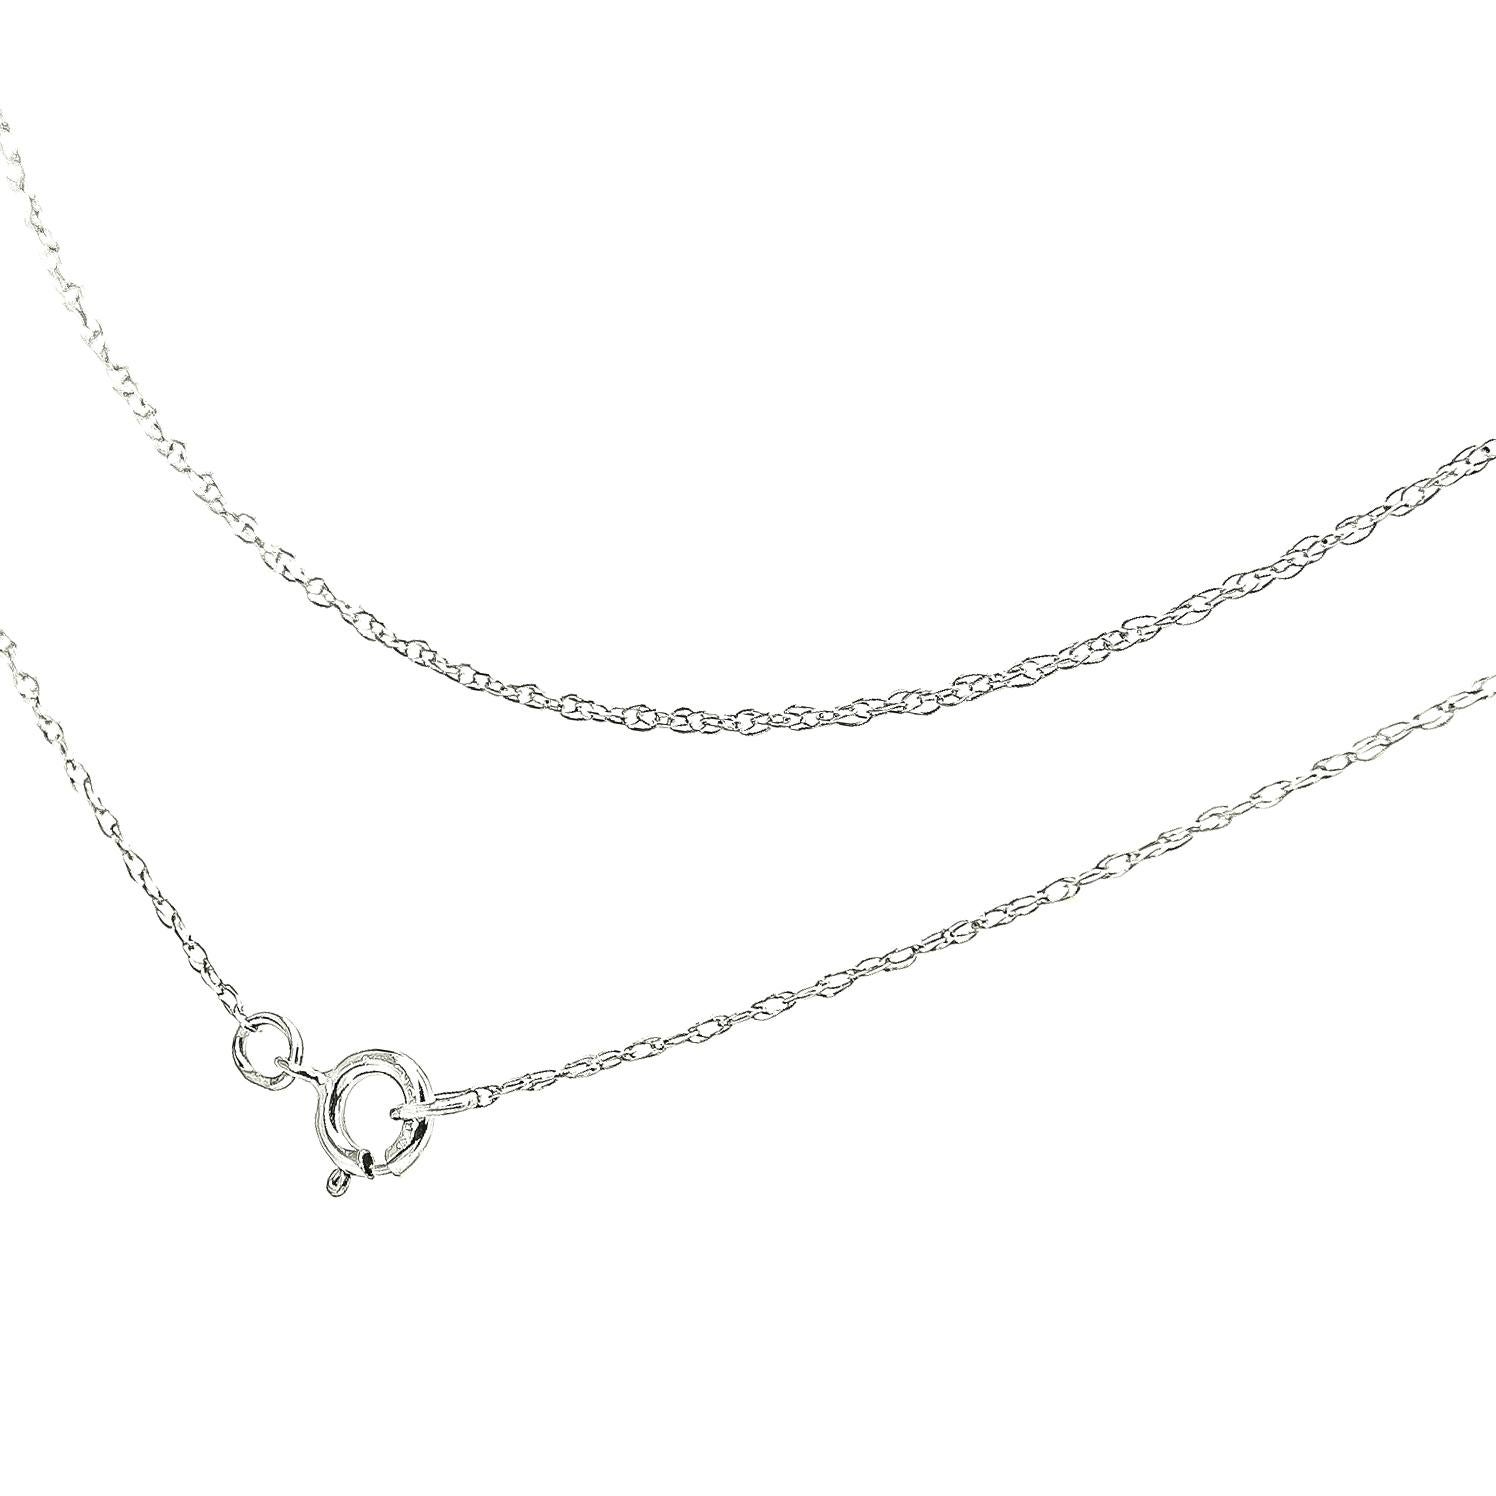 0.5 mm chain necklace